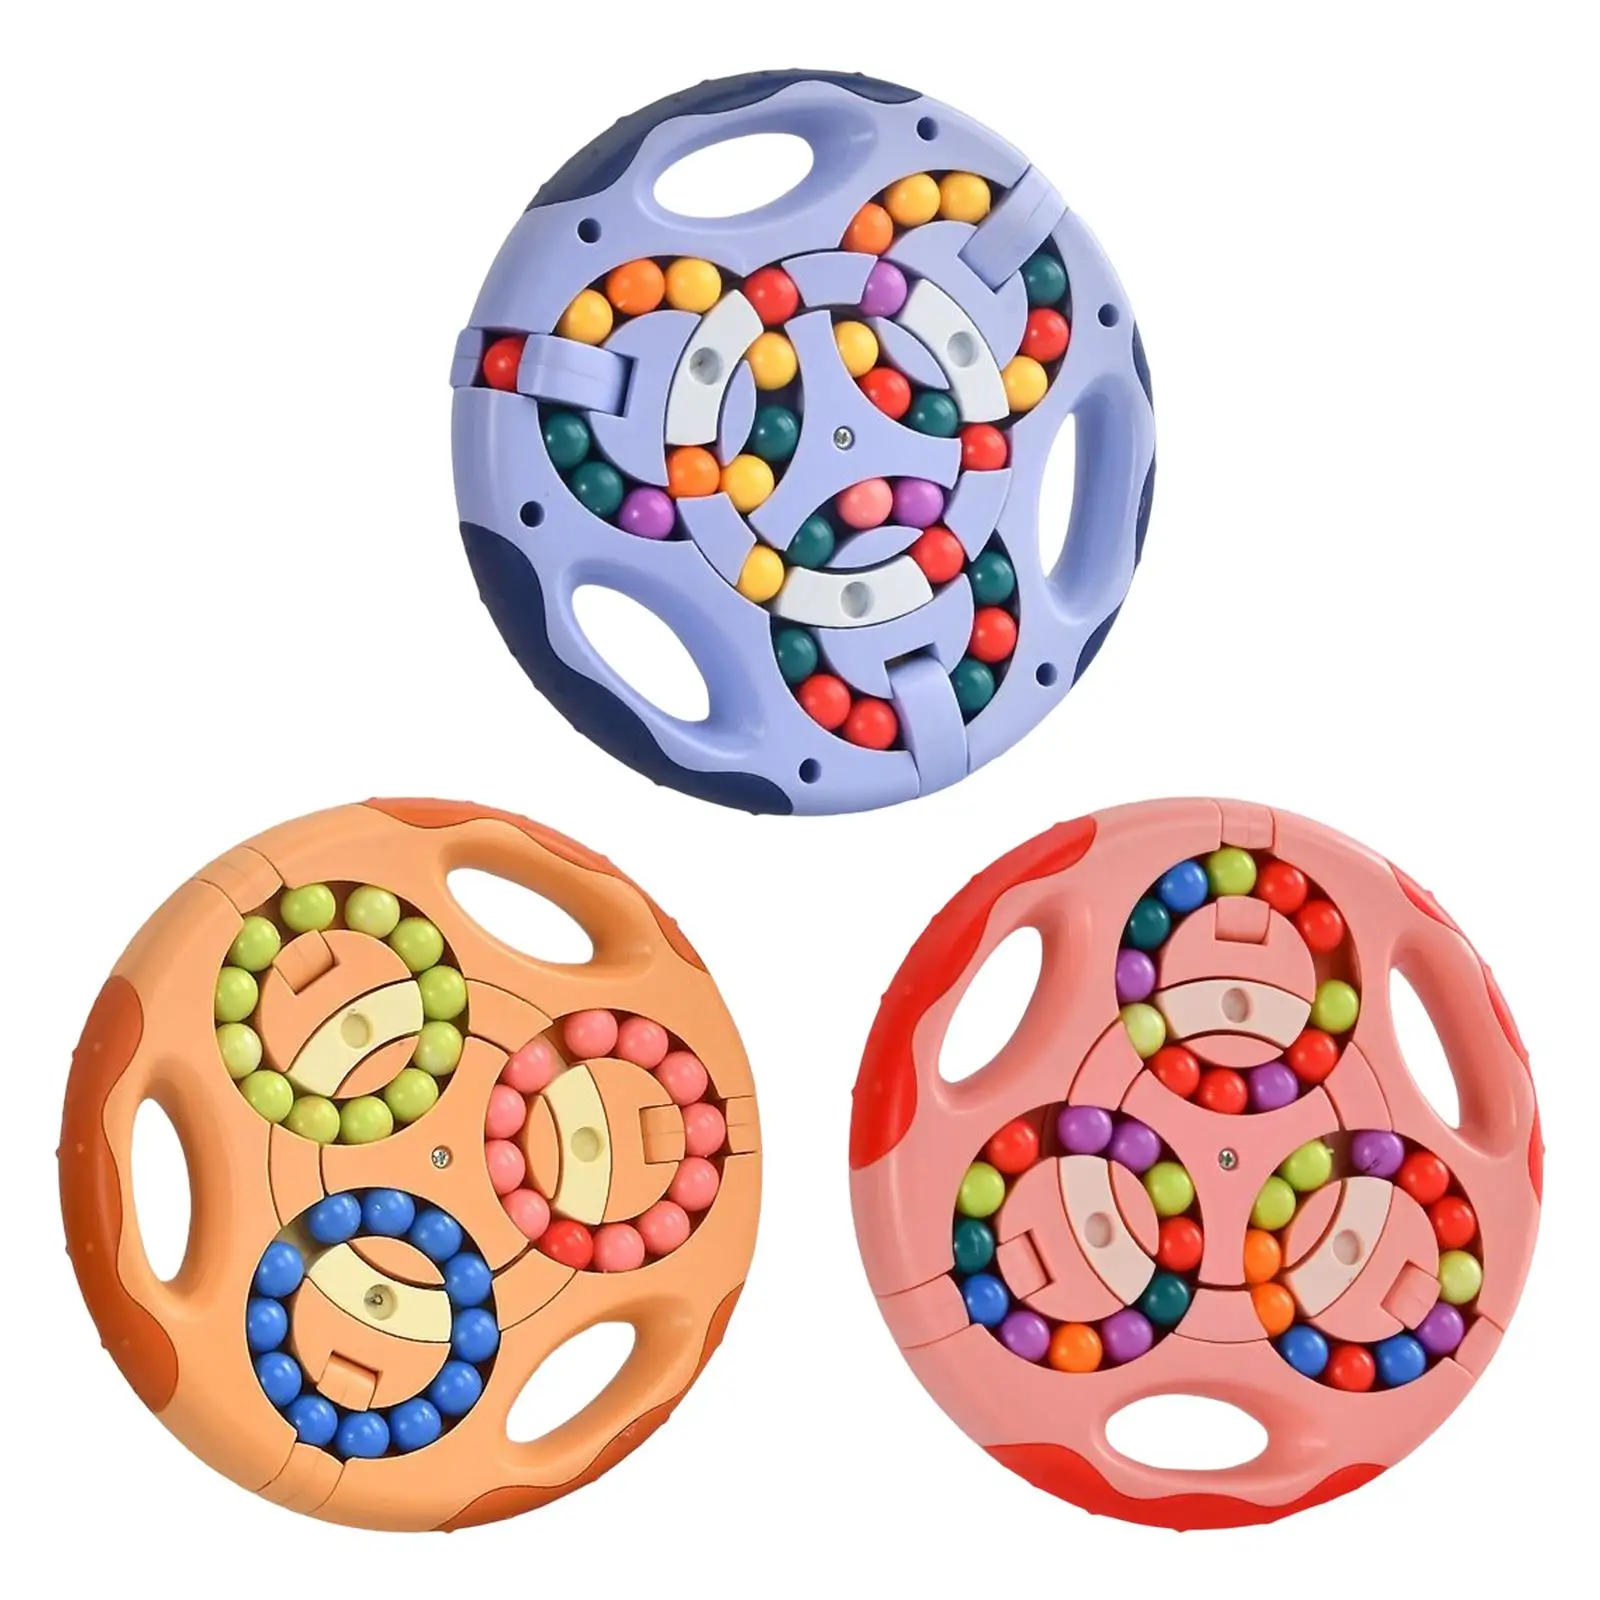 Rotating Magic Beans Fingertip Fidgeted Toys Kids Adults Stress Relief Spin Bead Puzzles Children Education Intelligence